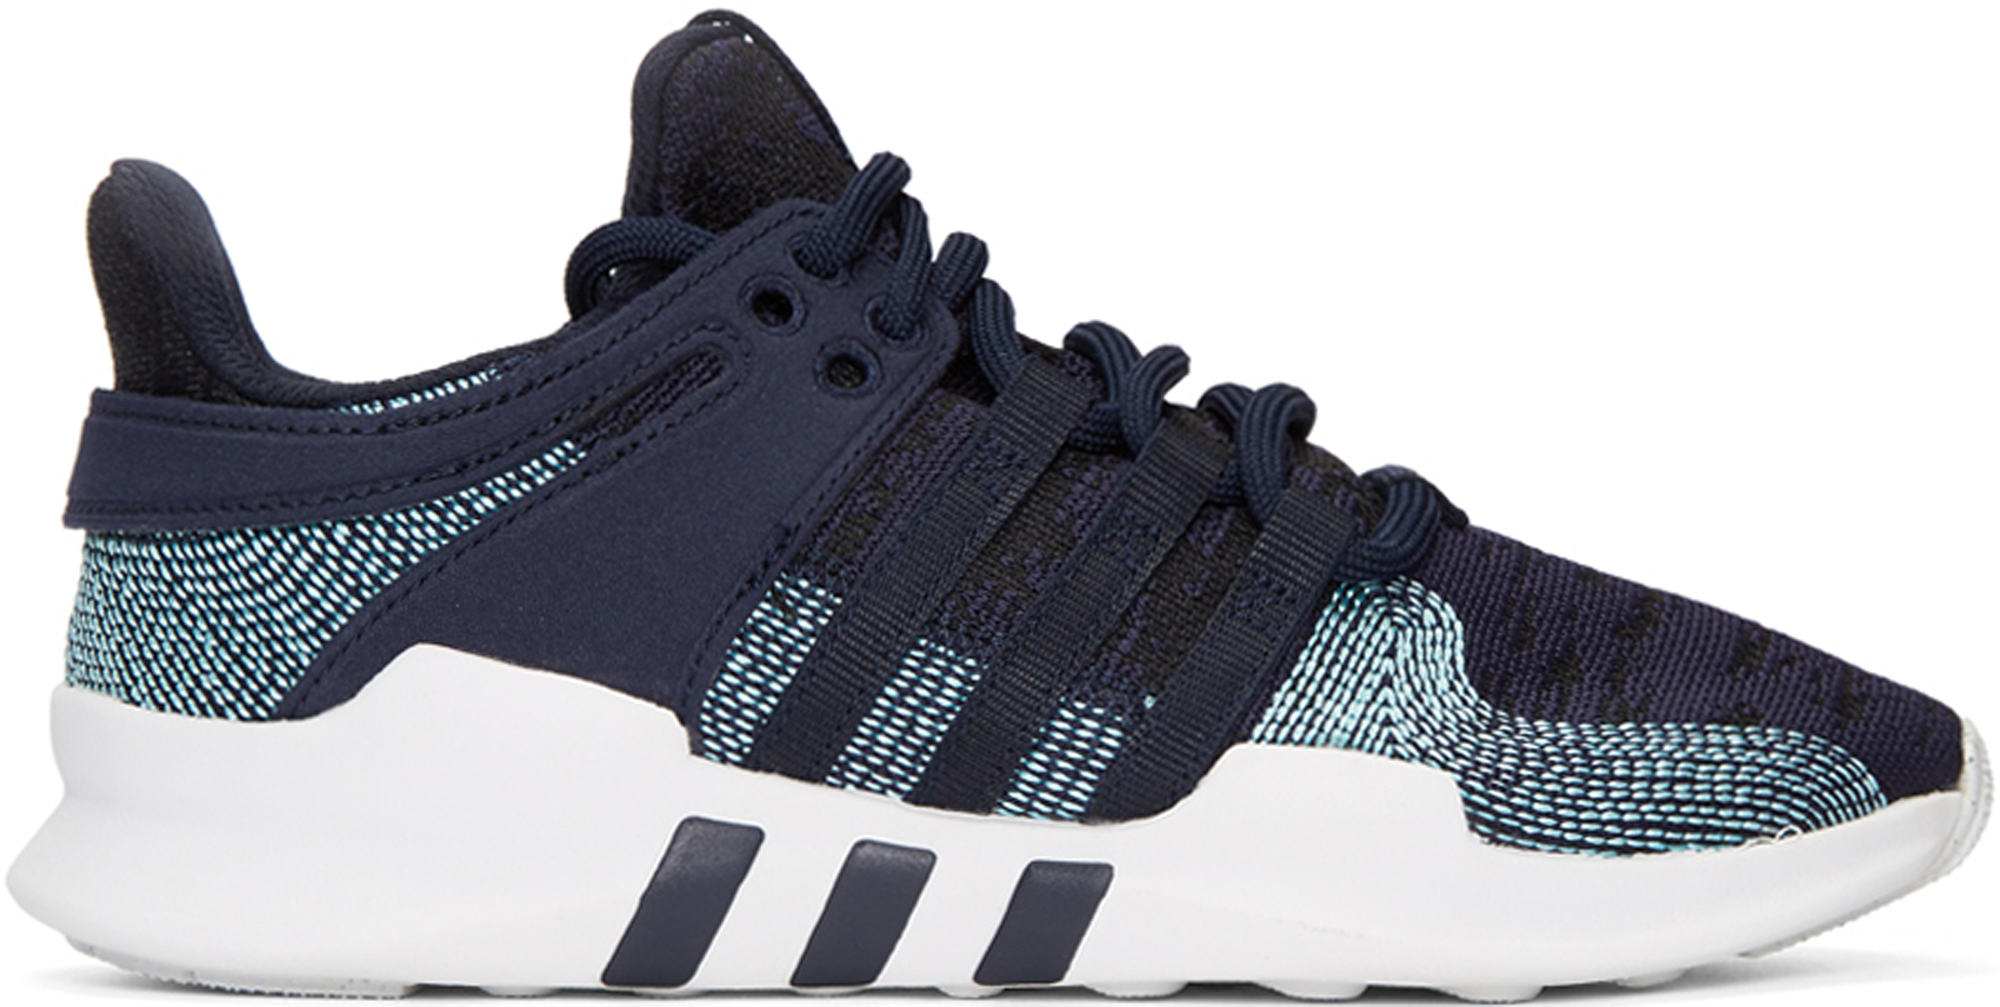 Eqt Support Adv Parley Online Sale, UP 